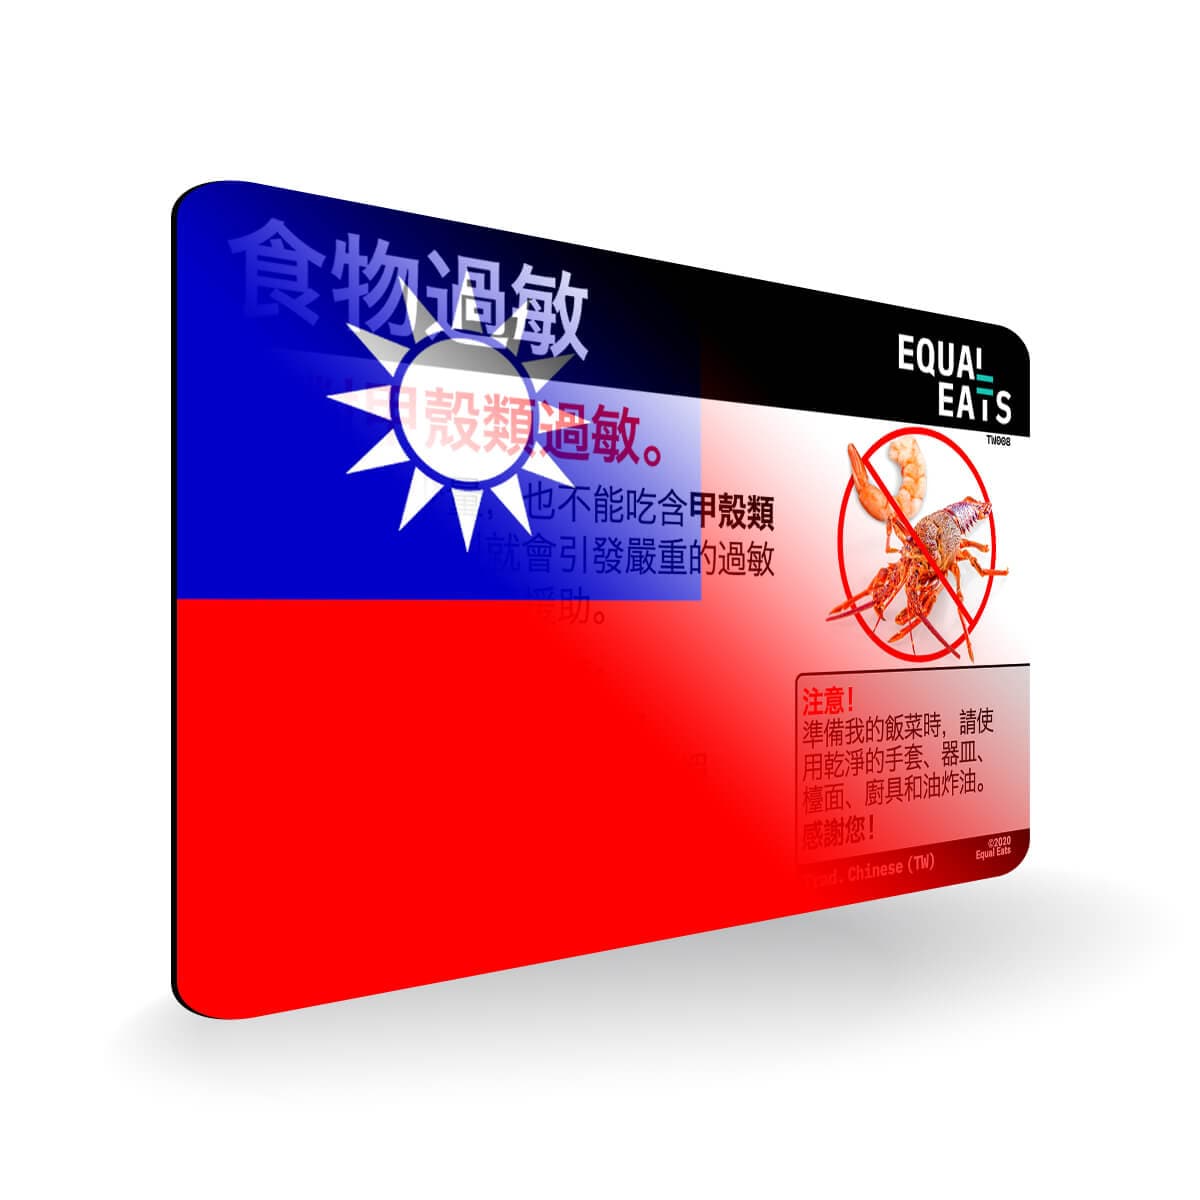 Crustacean Allergy in Traditional Chinese. Crustacean Allergy Card for Taiwan